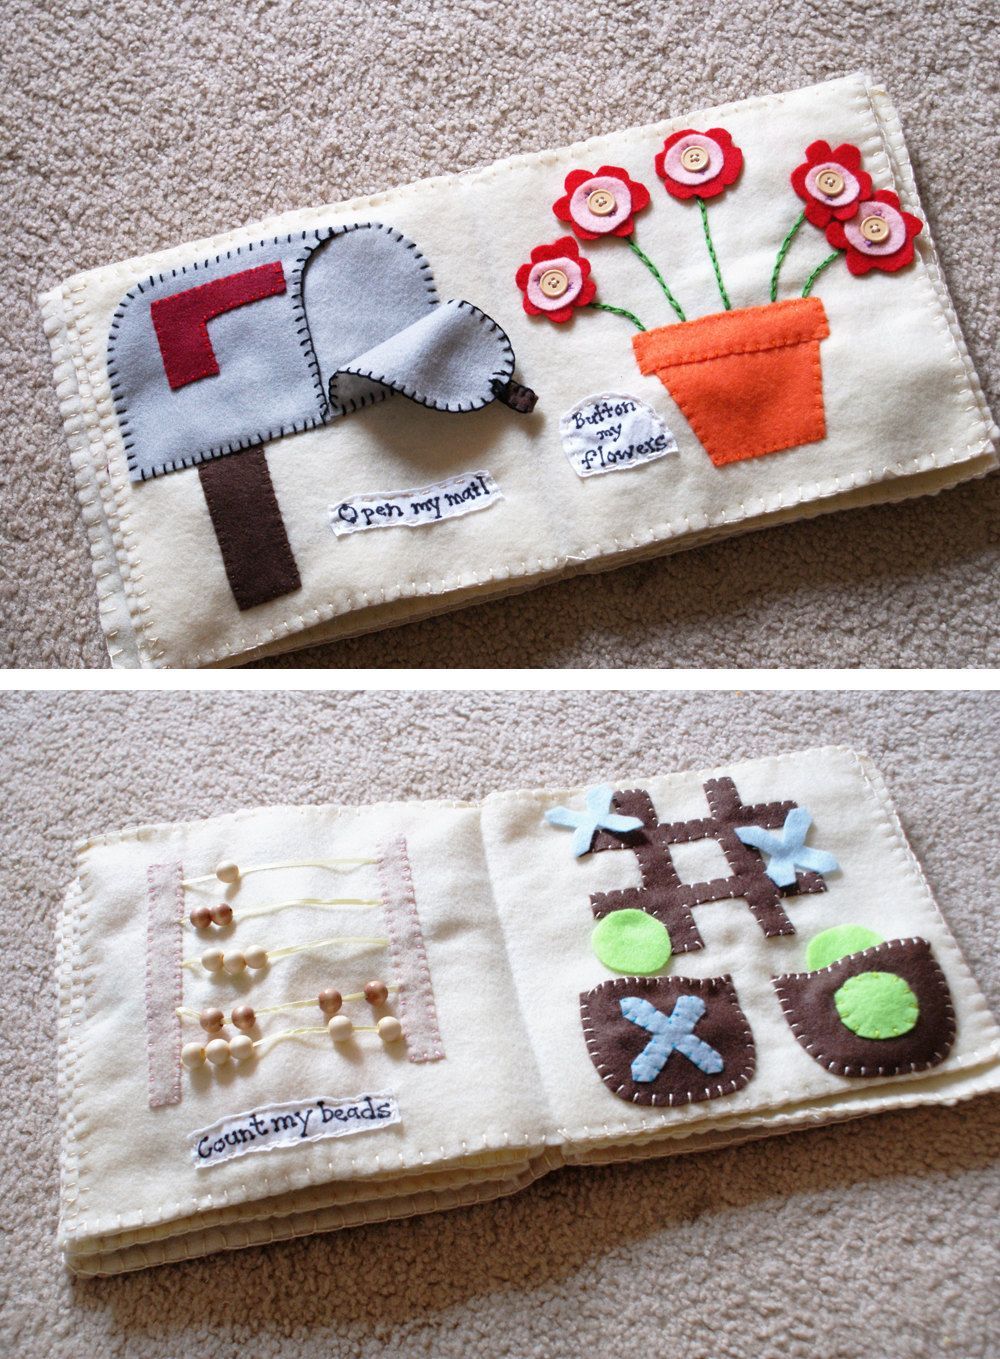 Interactive cloth books to sew for babies. You can even incorporate buttons, snaps, and other simple activities to occupy hands